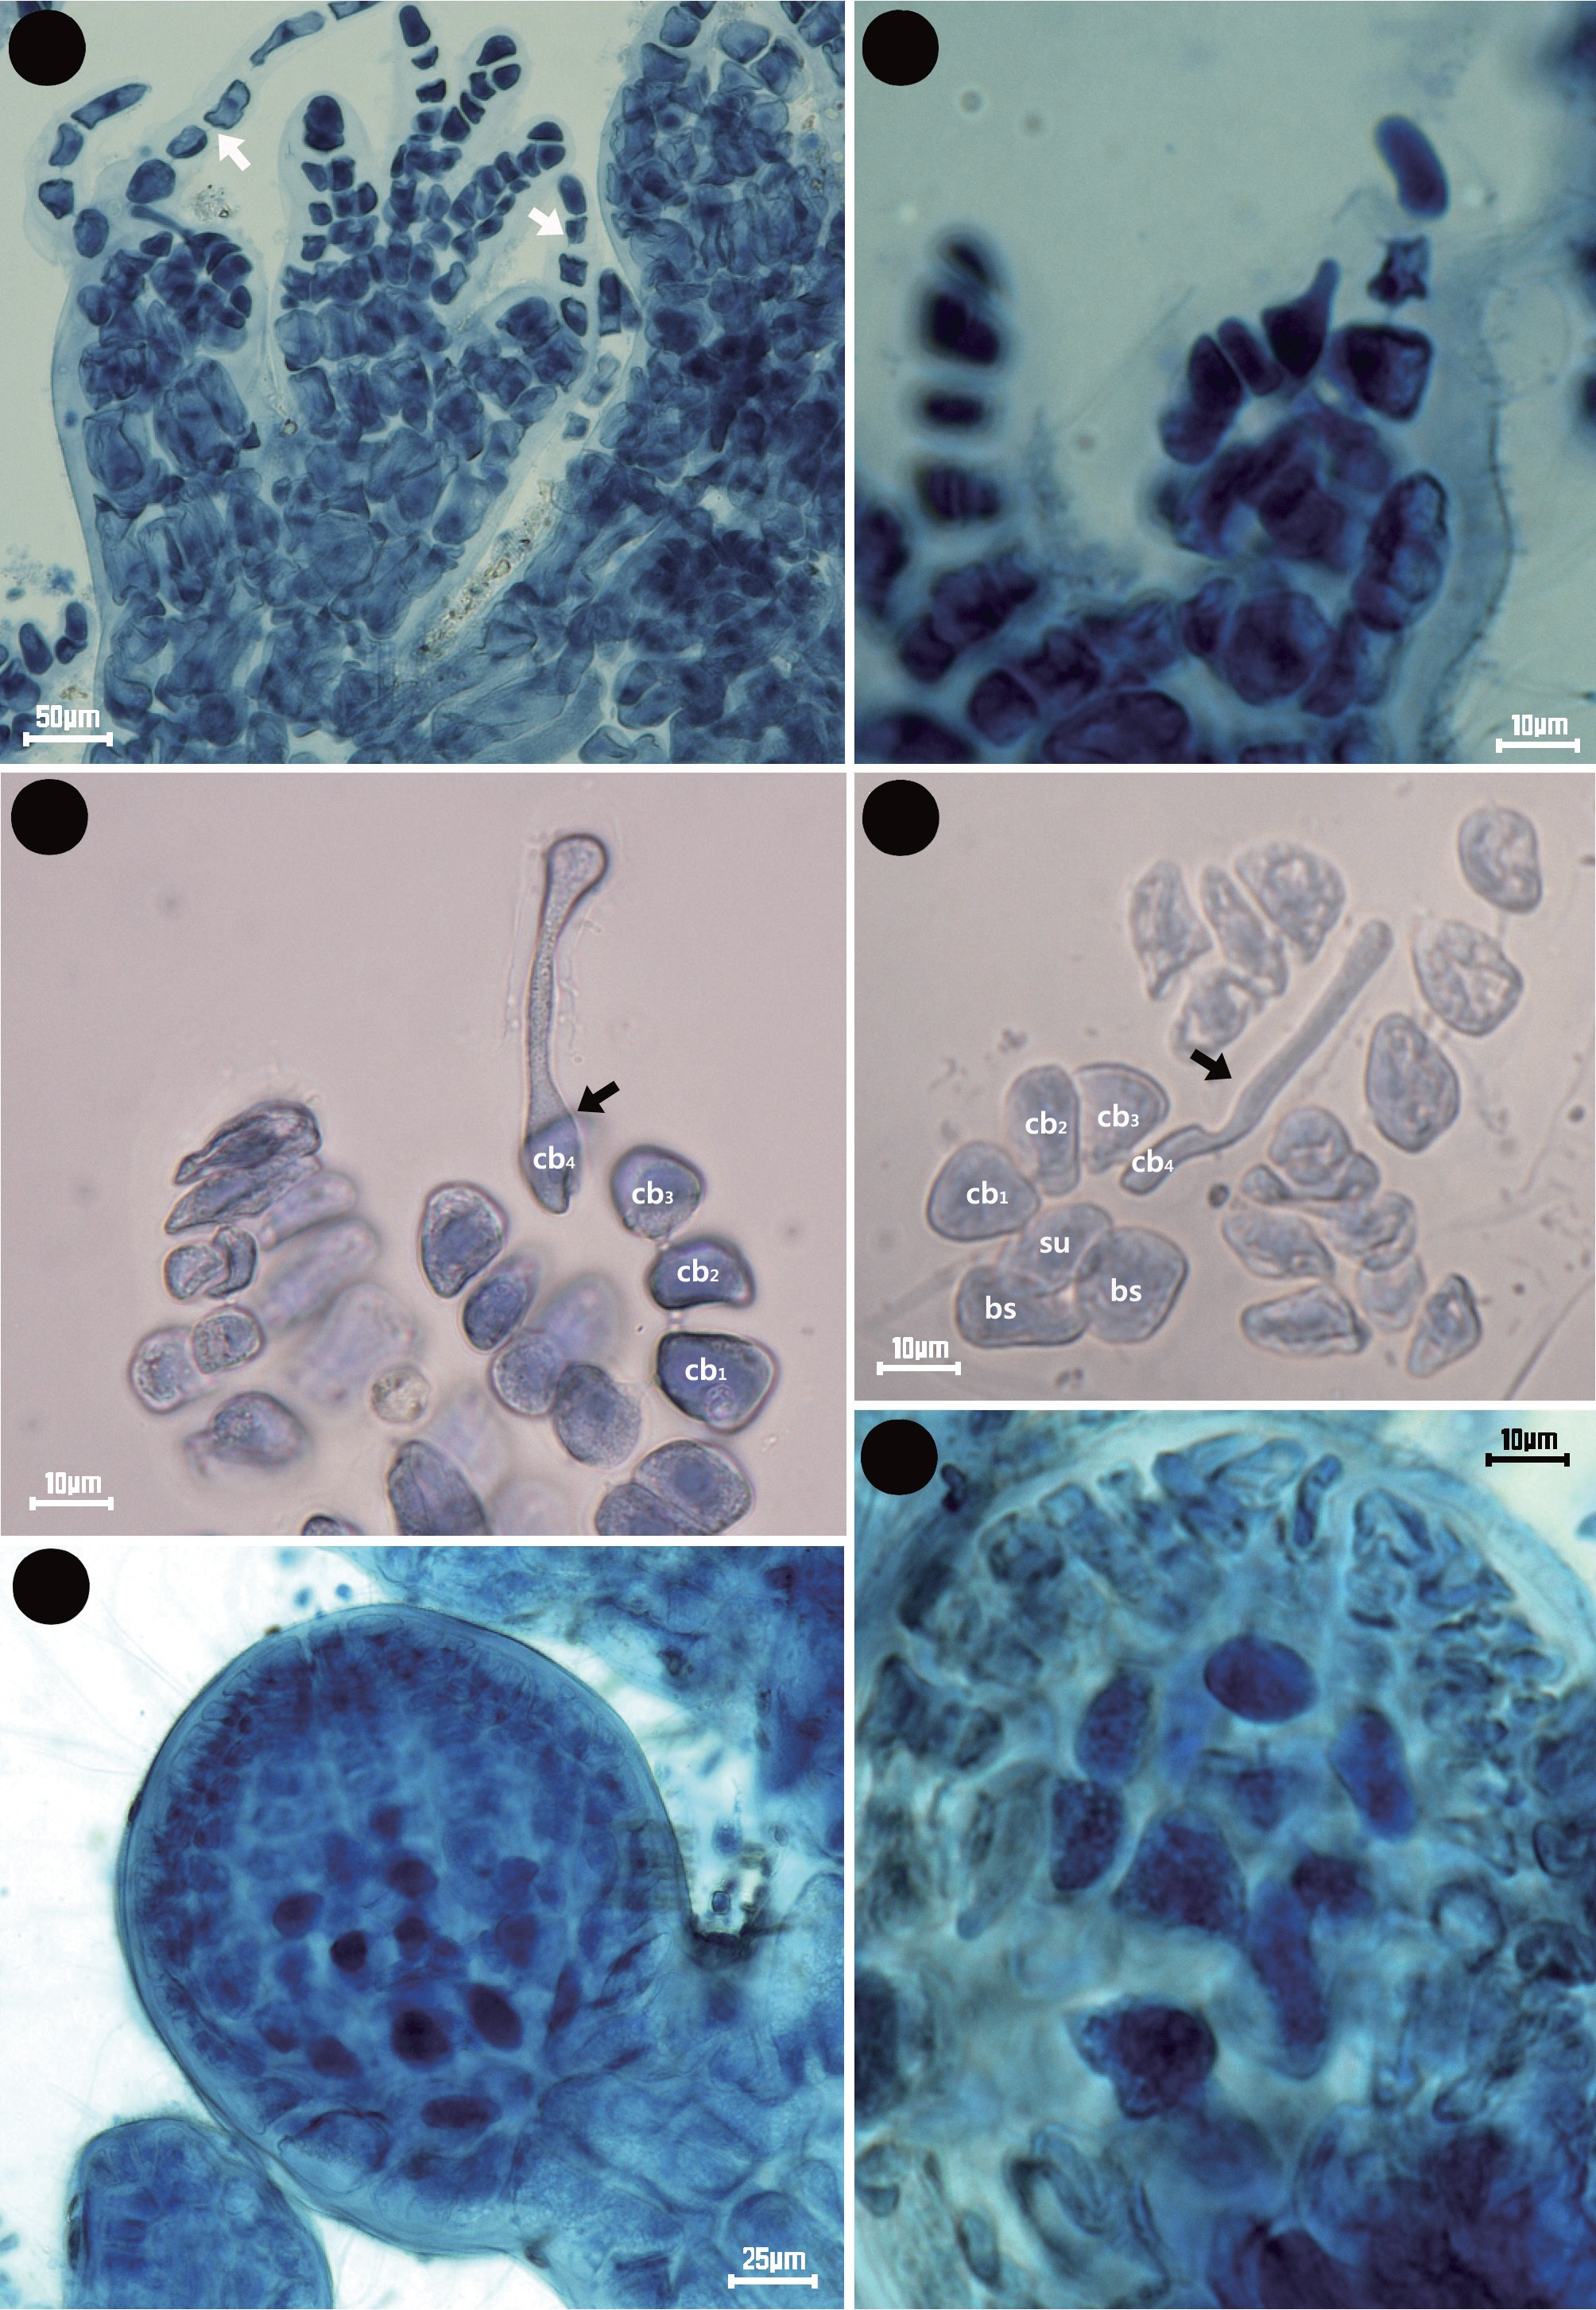 Symphyocolax koreana gen. et sp. nov. (A) Thallus showing procarps with trichoblast (arrows). (B-D) Carpogonial branch four-celled with two basal sterile cells and protruding trichogynes (arrows). (E & F) Gonimoblast in young cystocarp. bs basal sterile cell; cb carpogonial branch with cell numbers; su supporting cell.